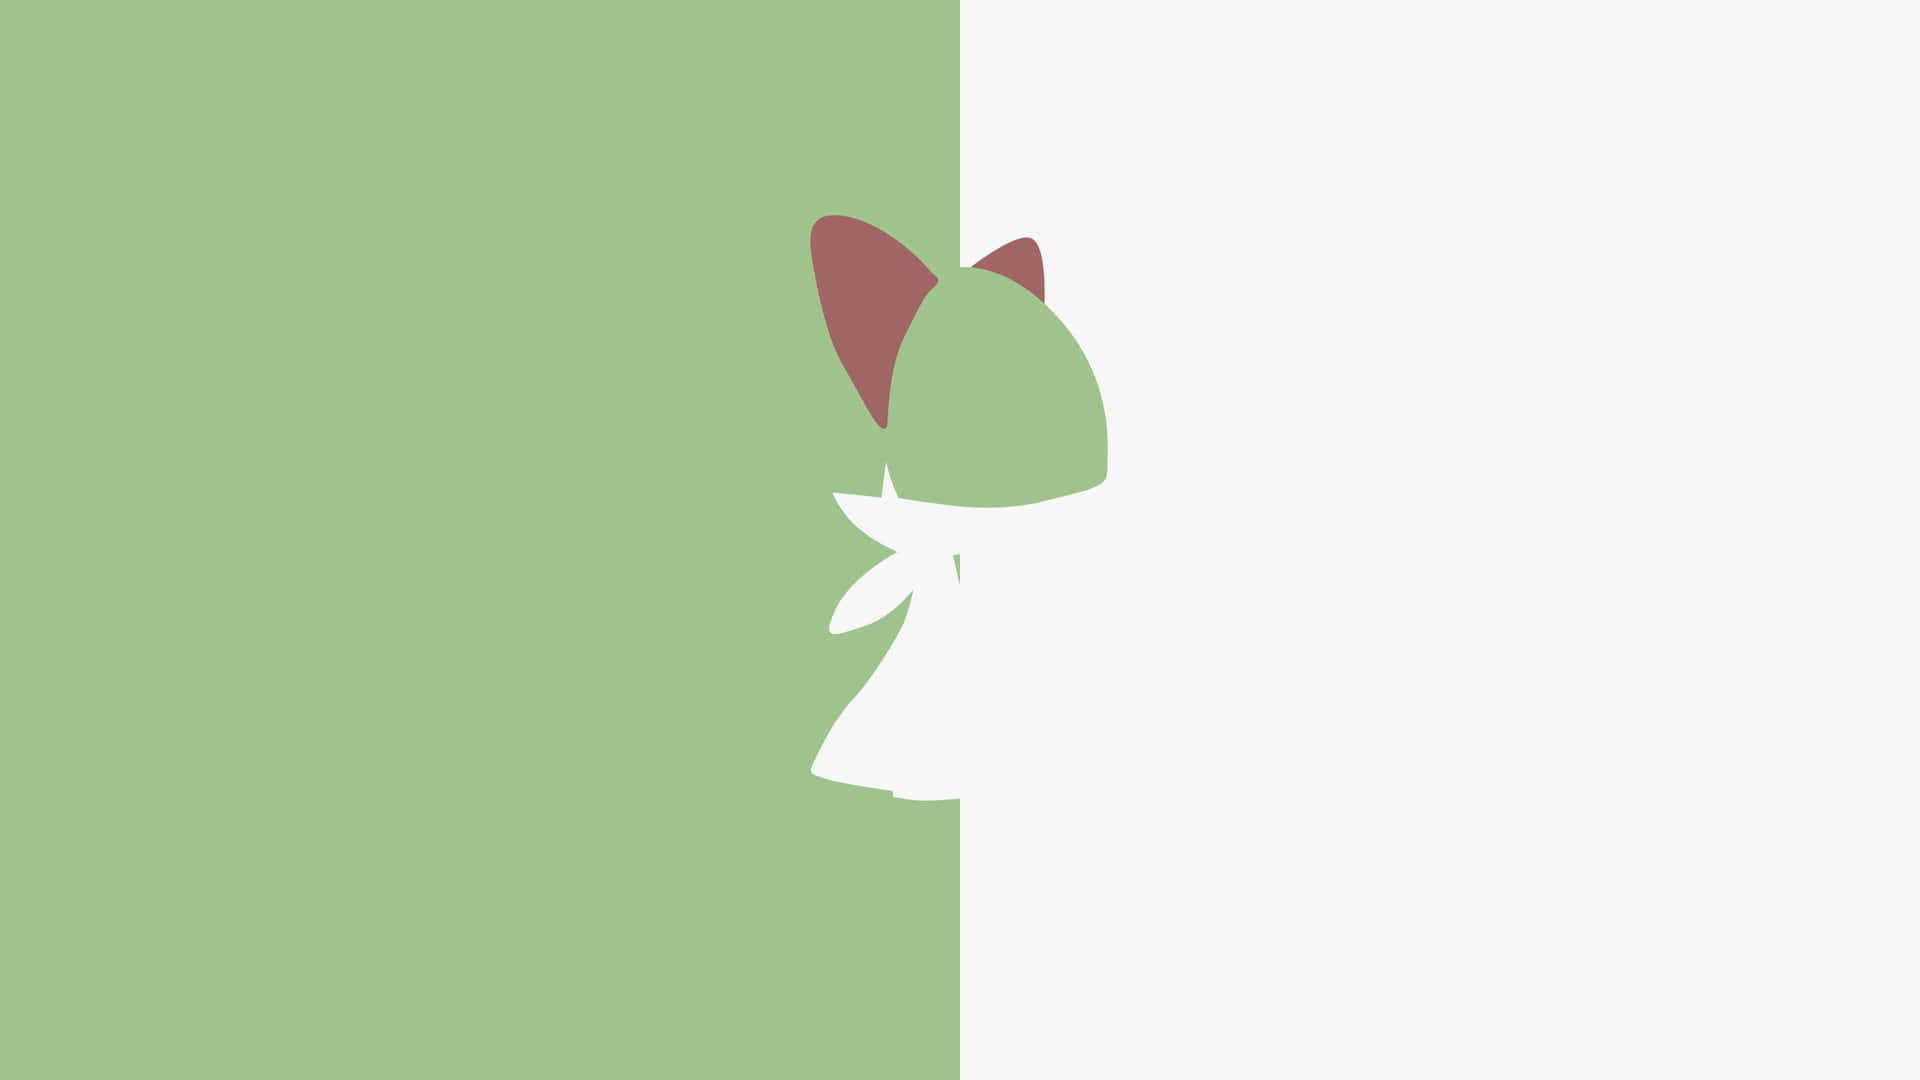 Ralts Graphic In Green And White Background Wallpaper